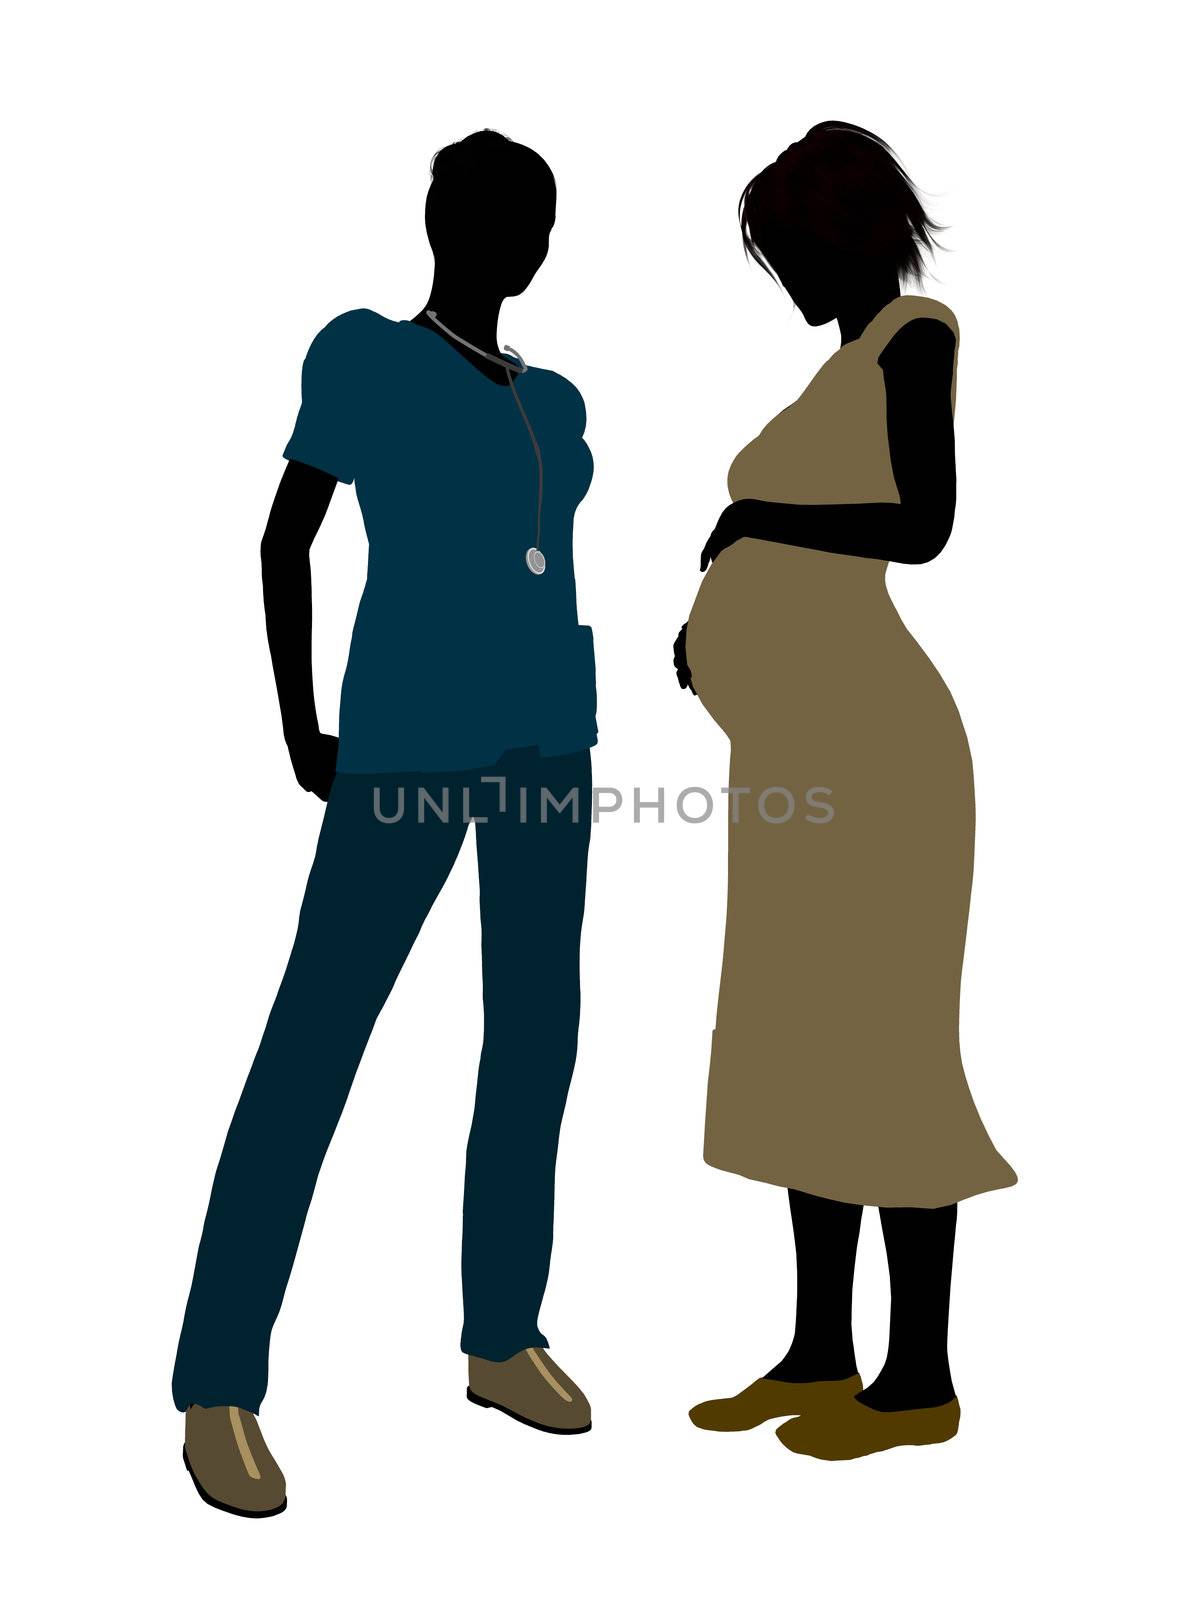 Female Doctor Silhouette by kathygold